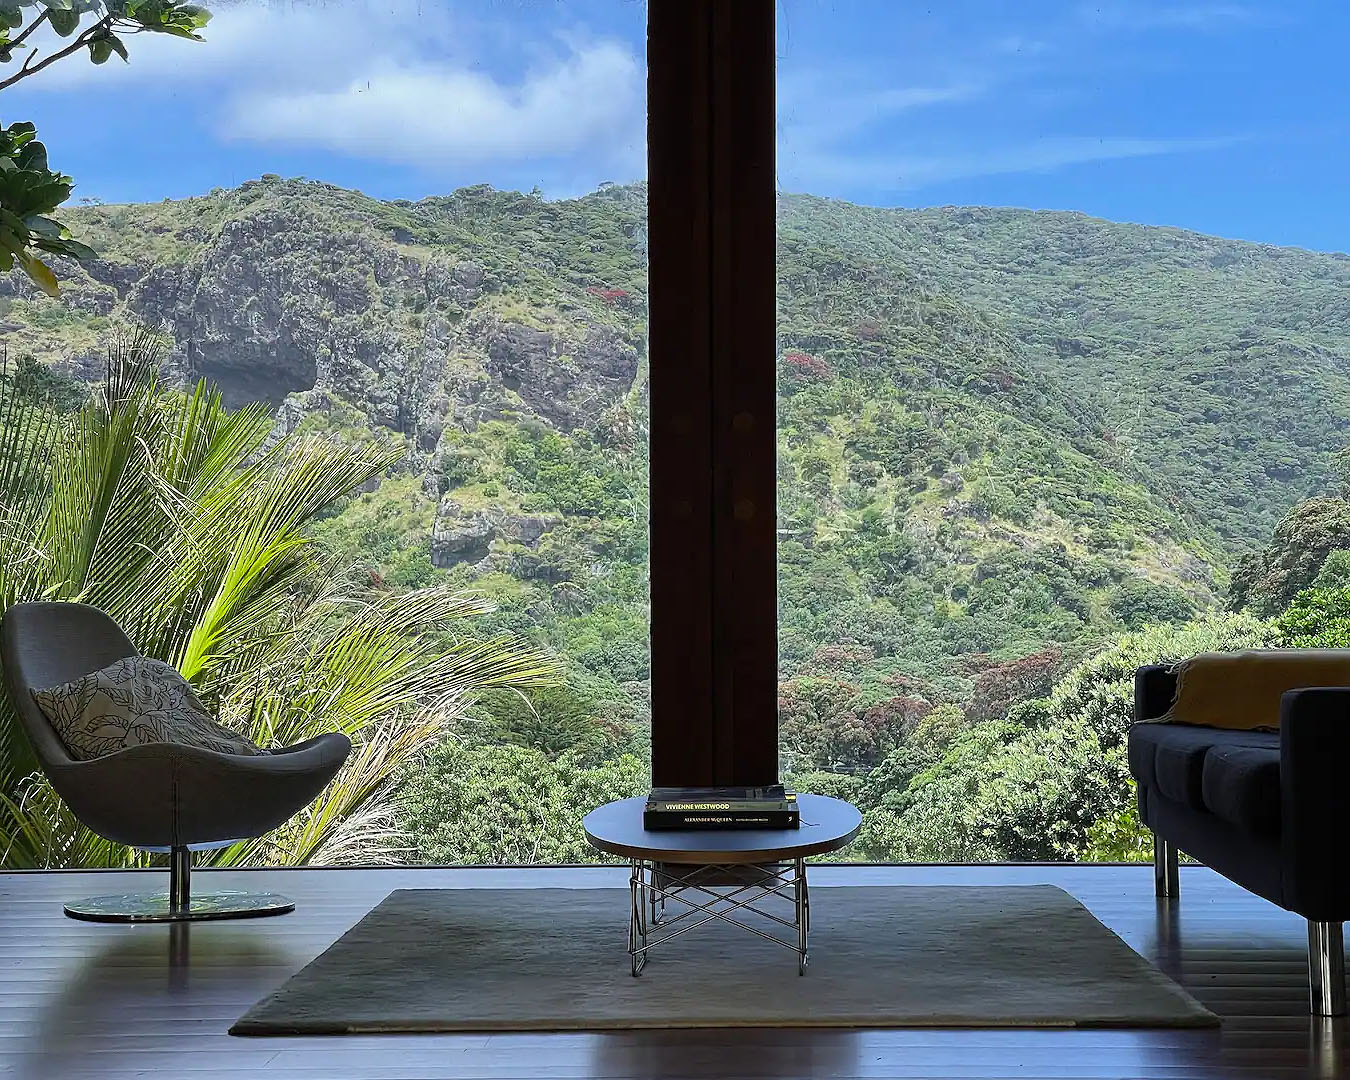 Floor to ceiling windows look out onto lush greenery, one of the best airbnbs with fireplaces in New Zealand.